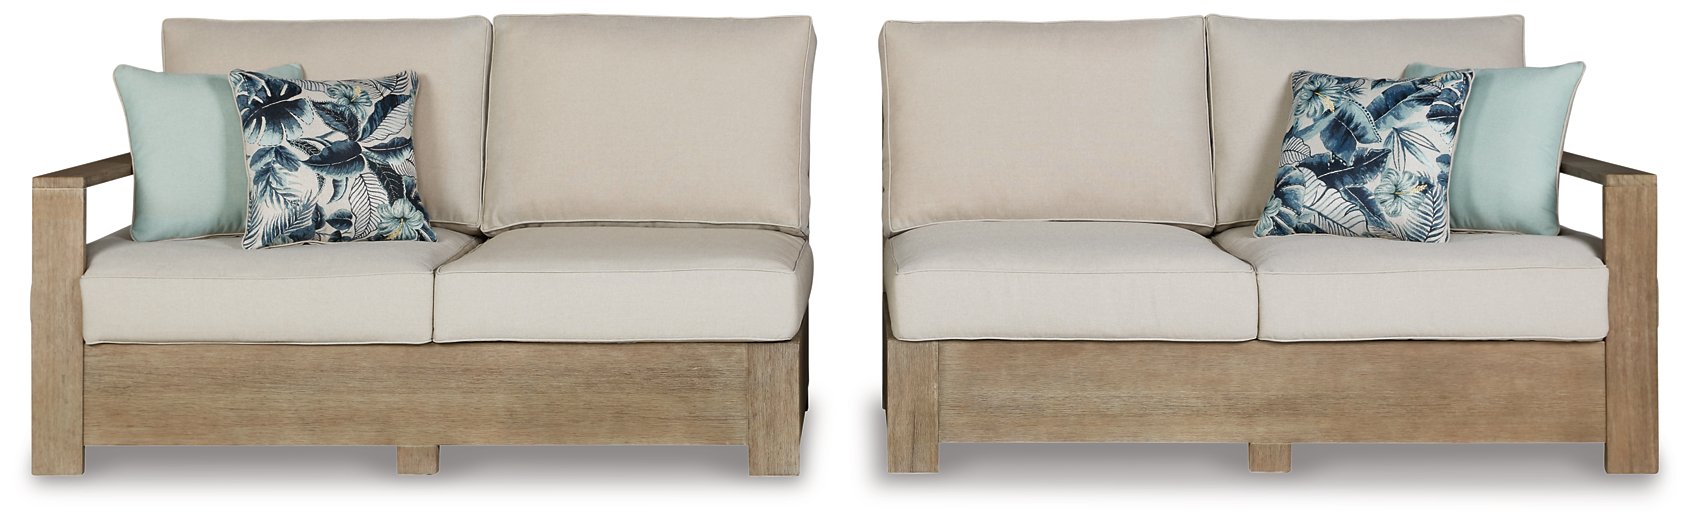 Silo Point Right-Arm Facing/Left-Arm Facing Outdoor Loveseat with Cushion (Set of 2) image